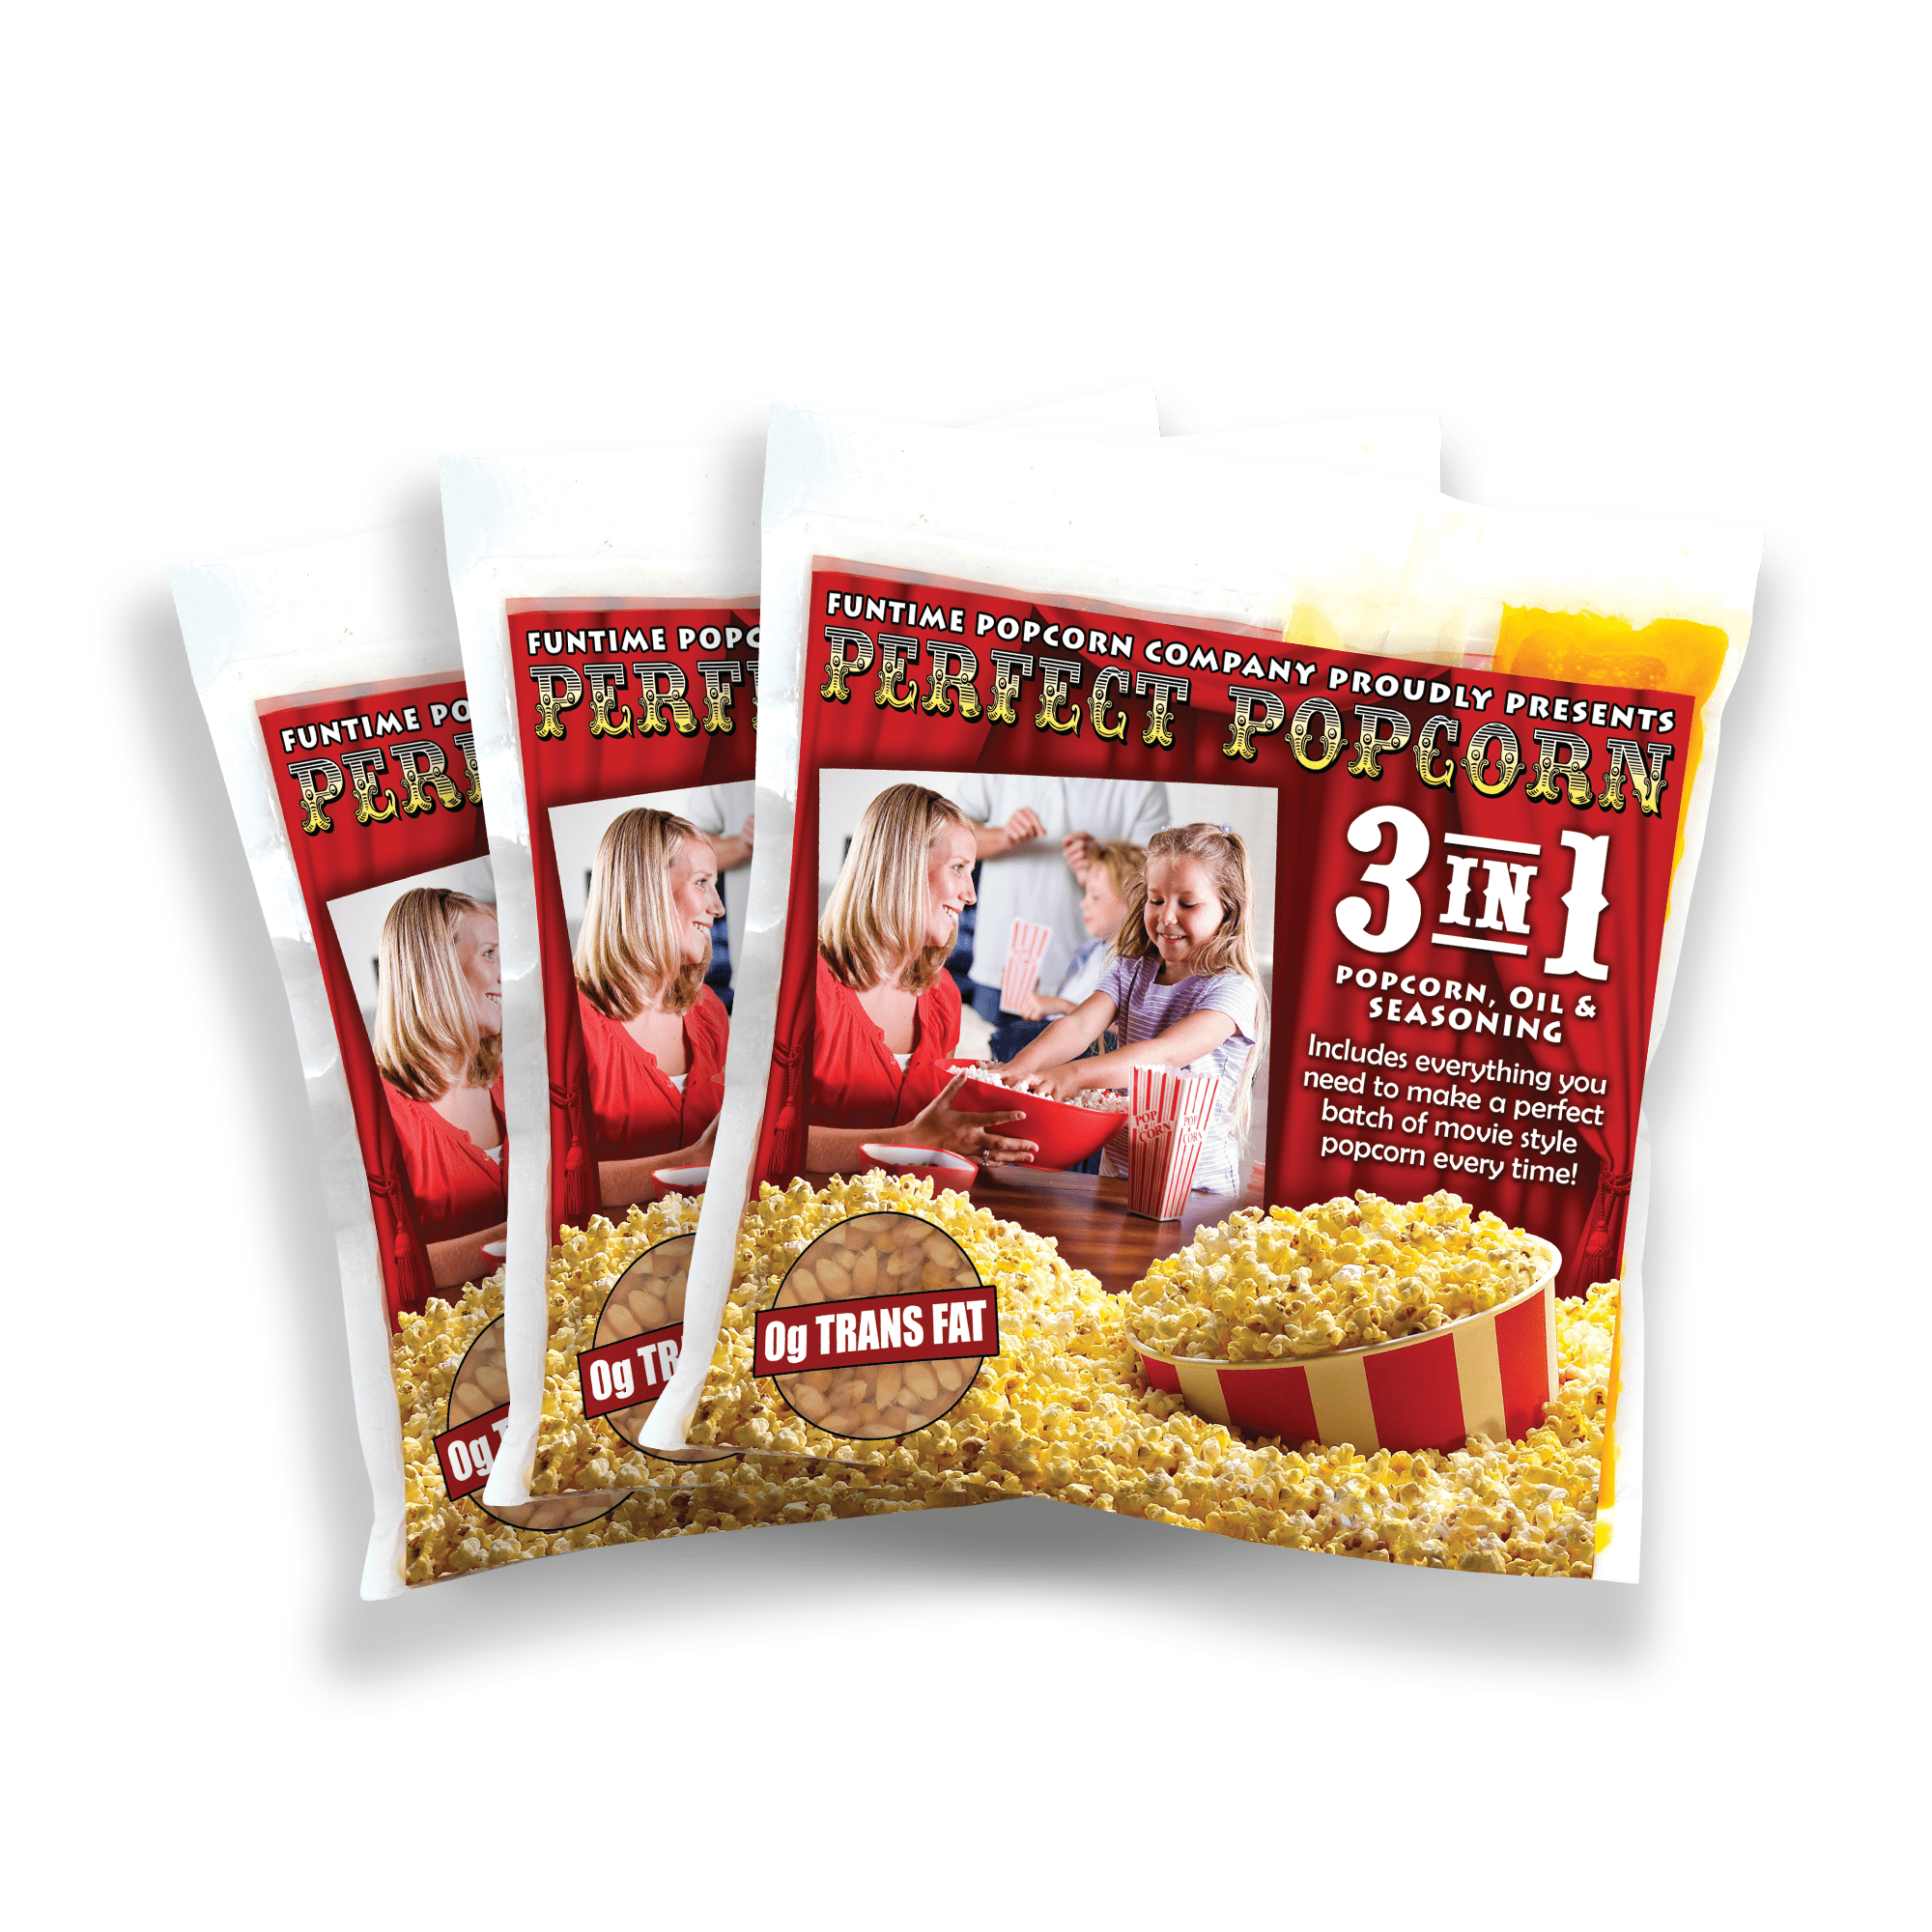 12 oz. popcorn all in one pack